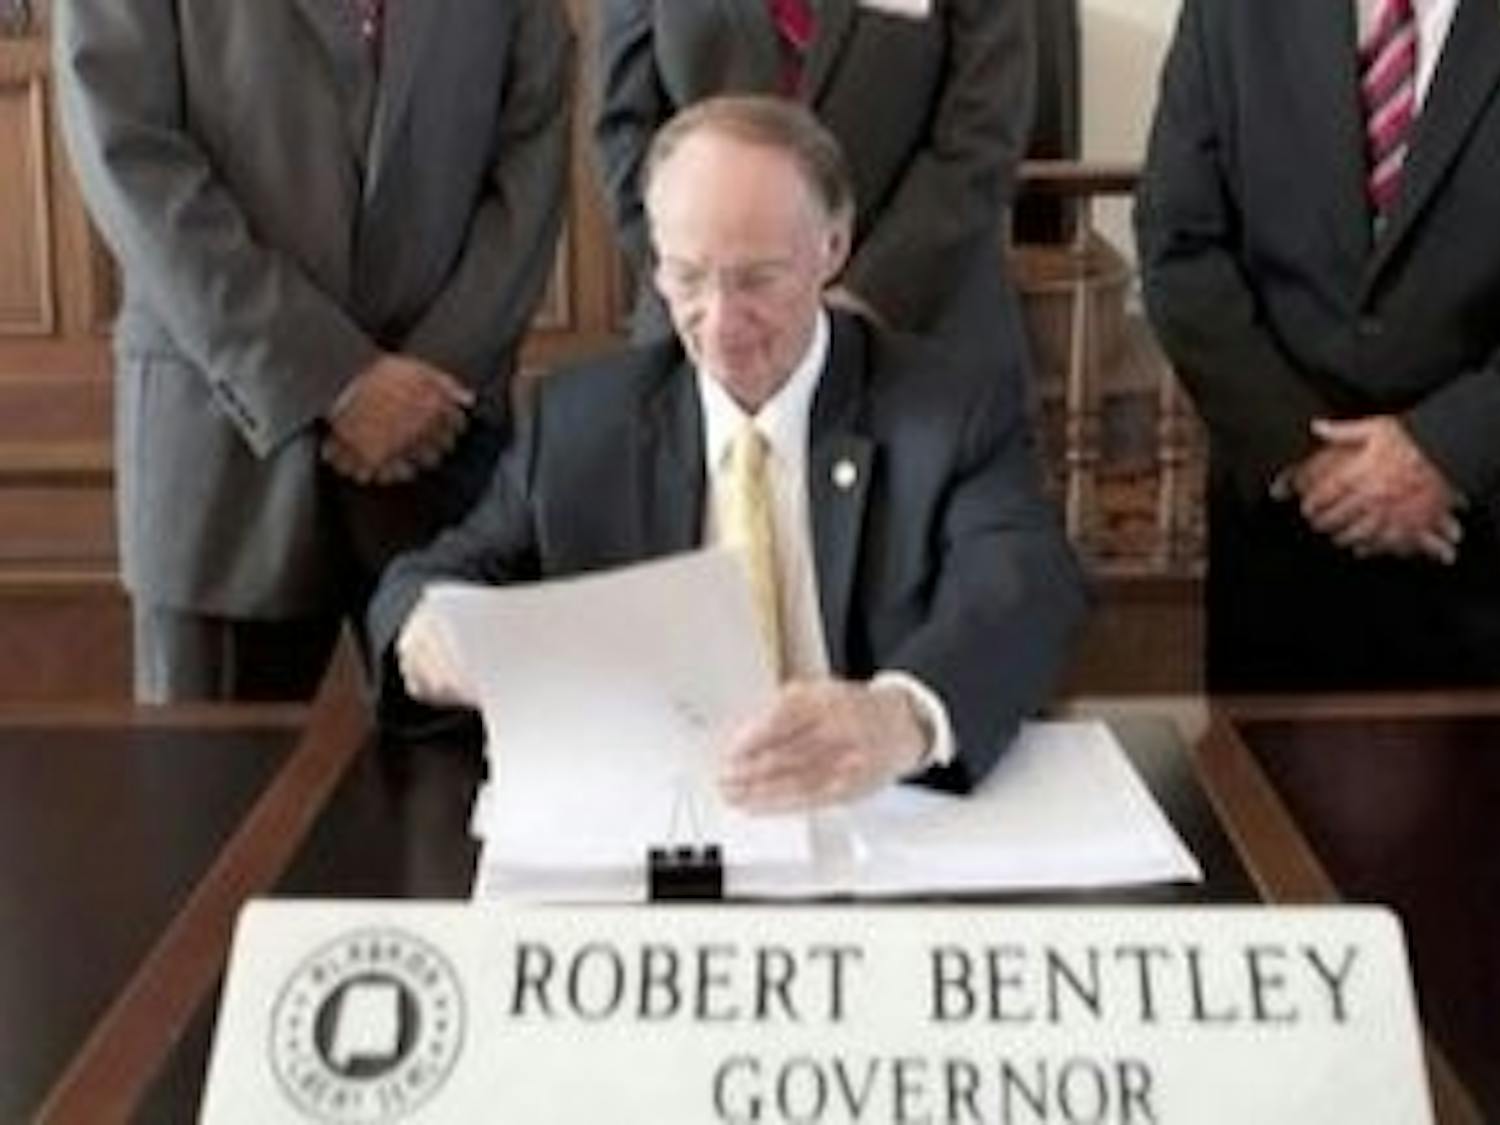 Gov. Robert Bentley signs into law the immigration bill known as H.B. 56. (Courtesy of the Governor's office)